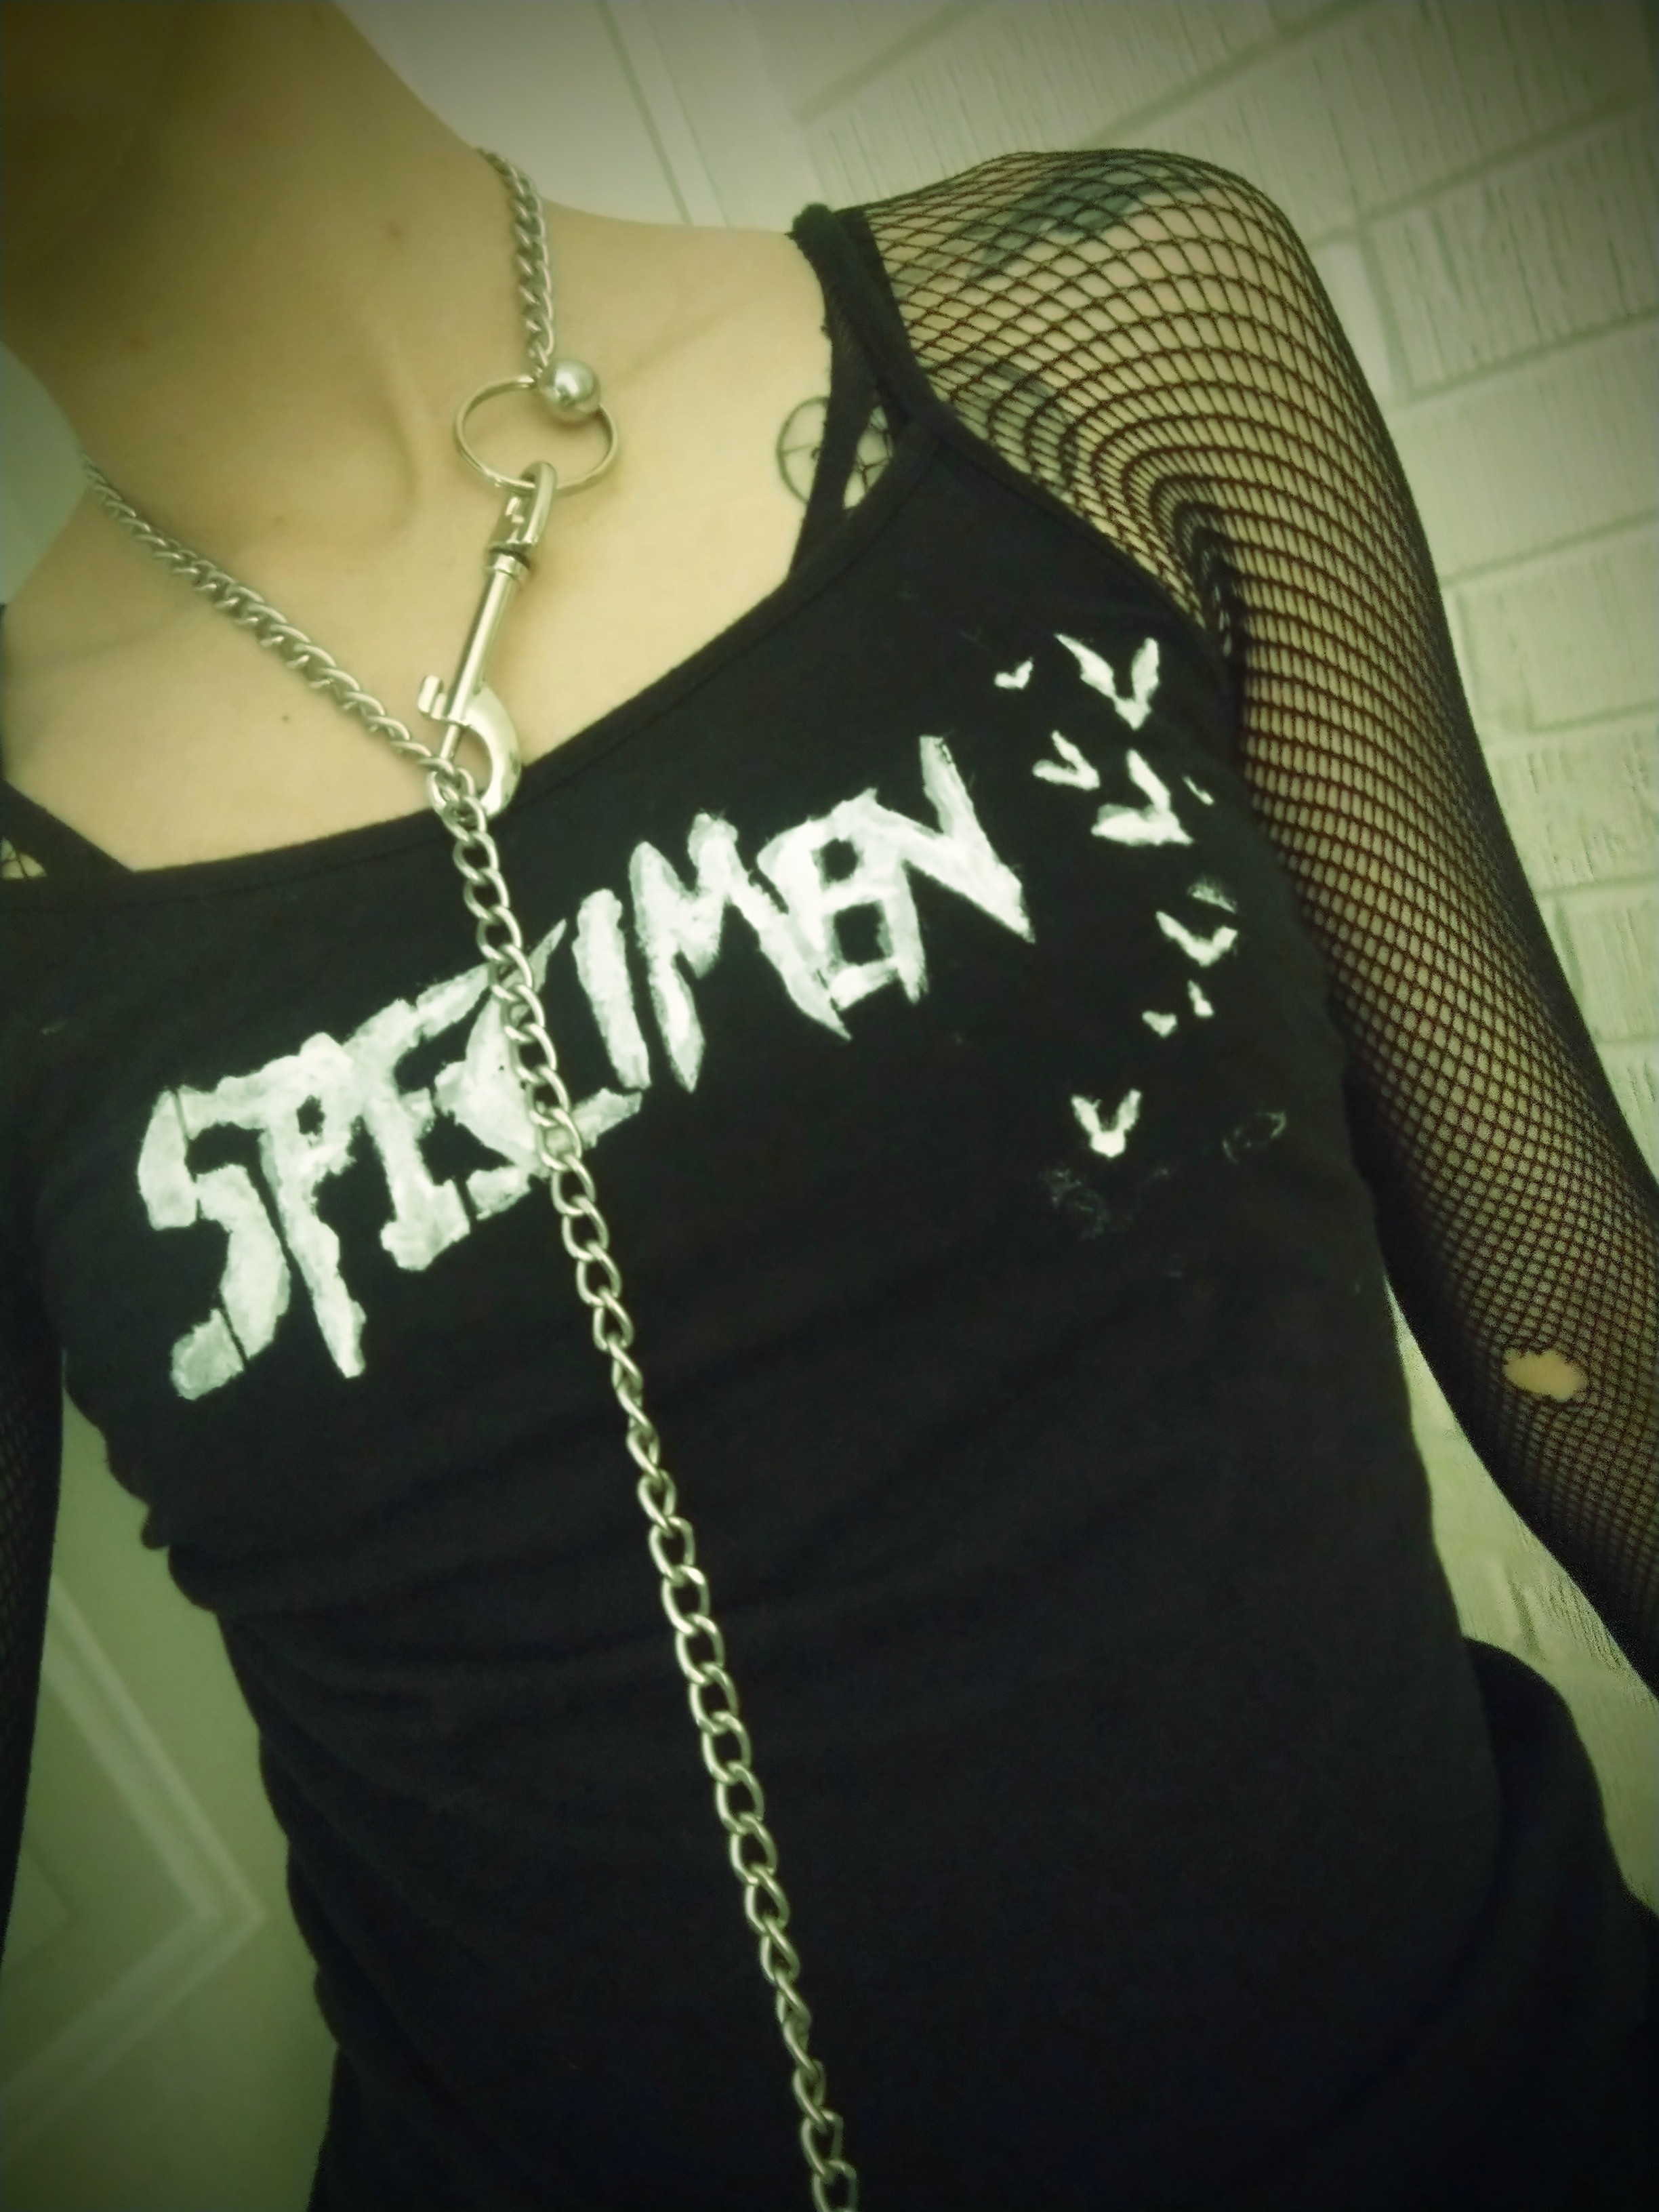 Torso of a person wearing a black tanktop with the band name Specimen on it